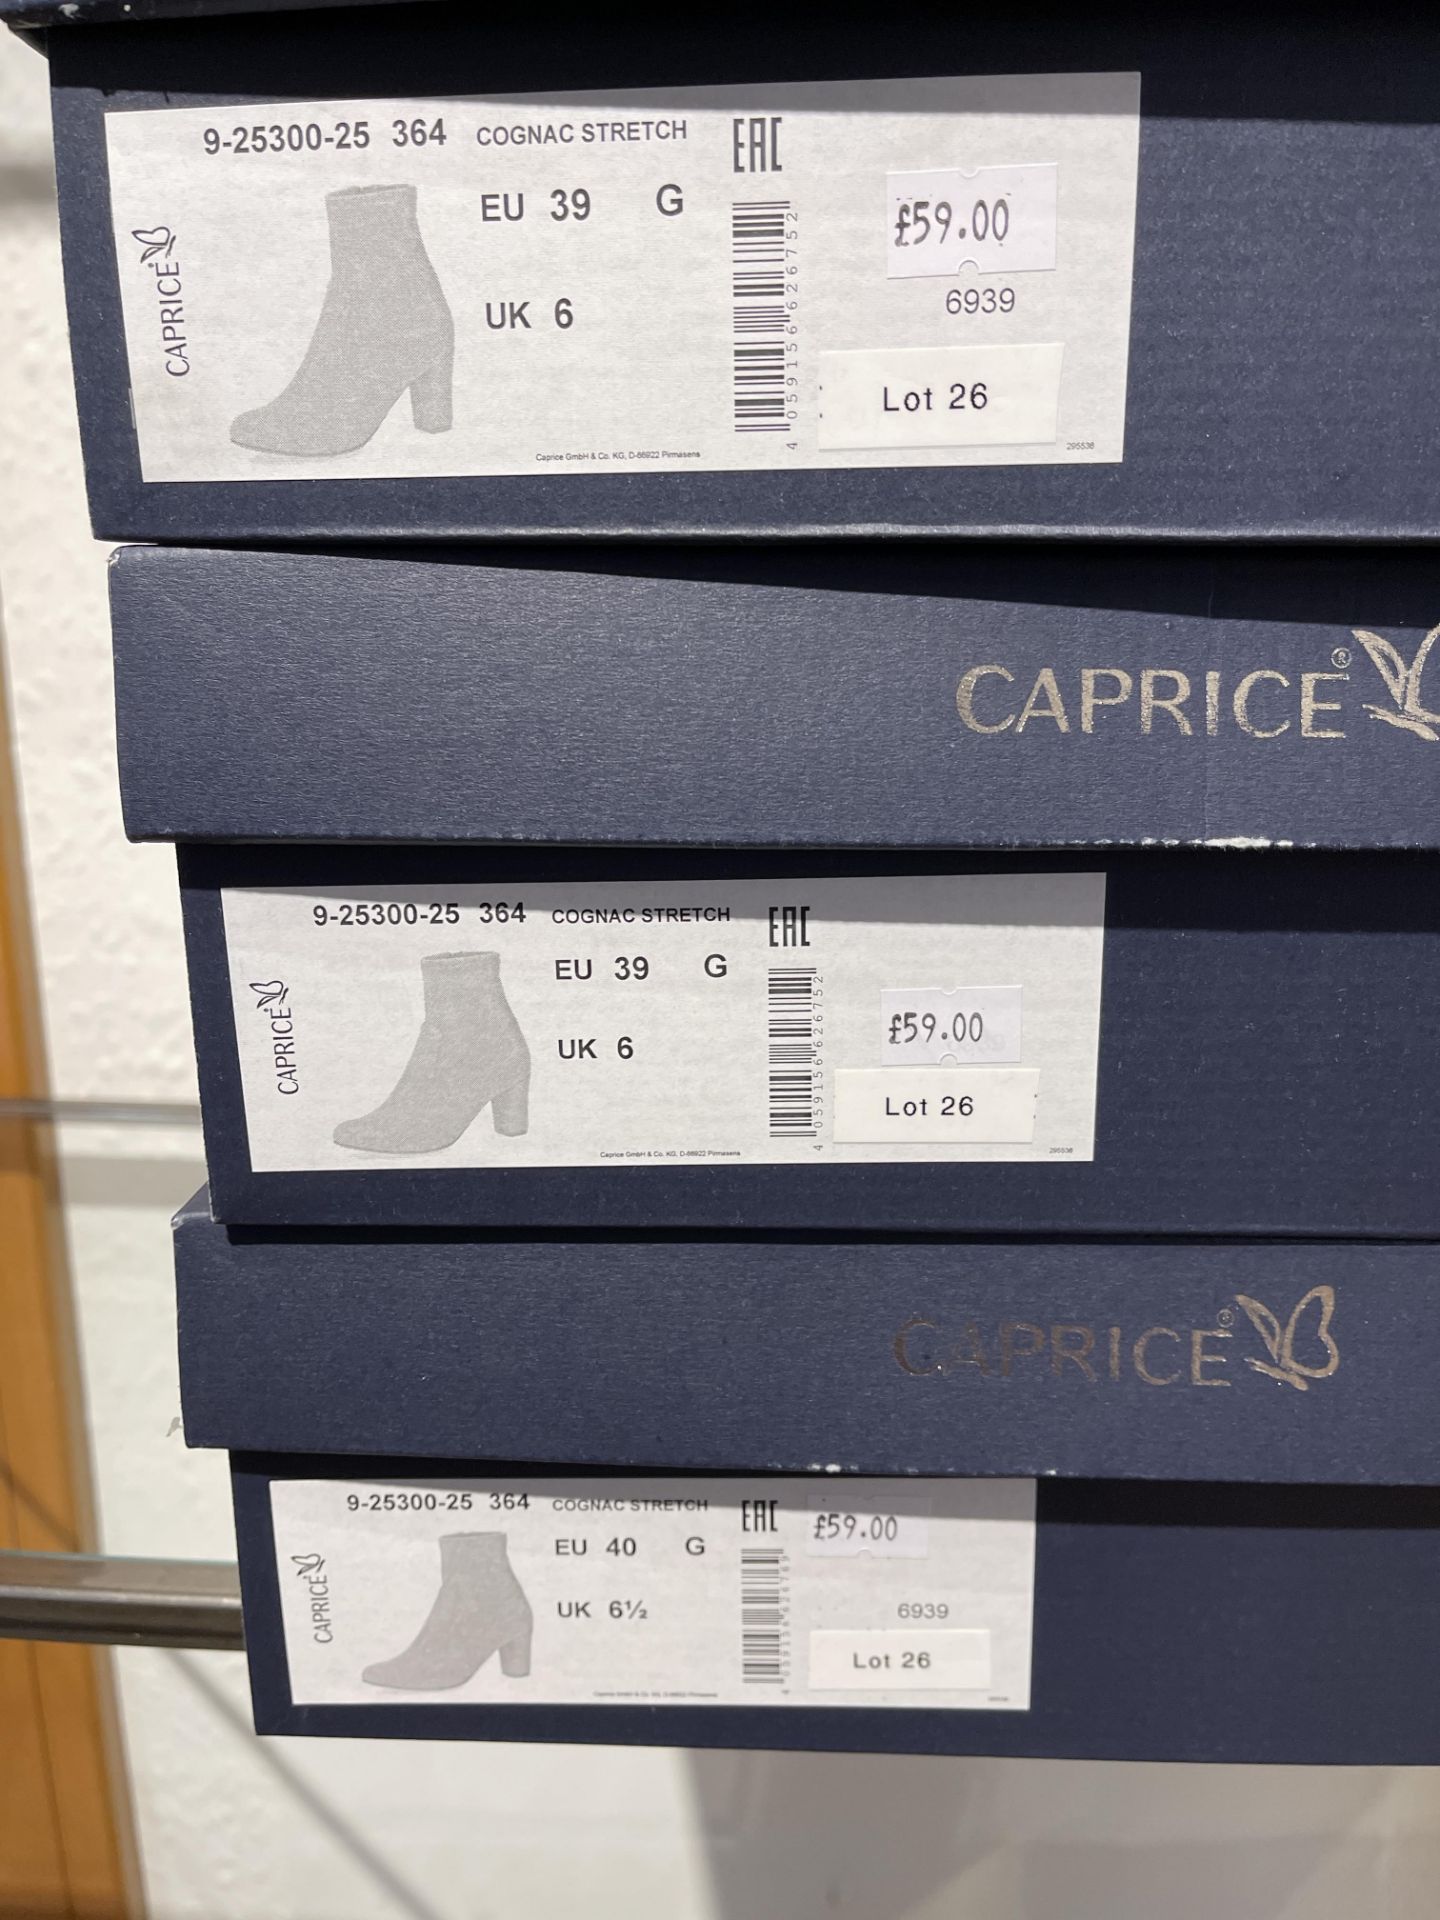 Caprice 5 Pairs: Cognac/Ocean Ankle Boots 9-25331-25 387. Sizes 5 - 6.5 (RRP £89.99) Caprice 5 - Image 12 of 14